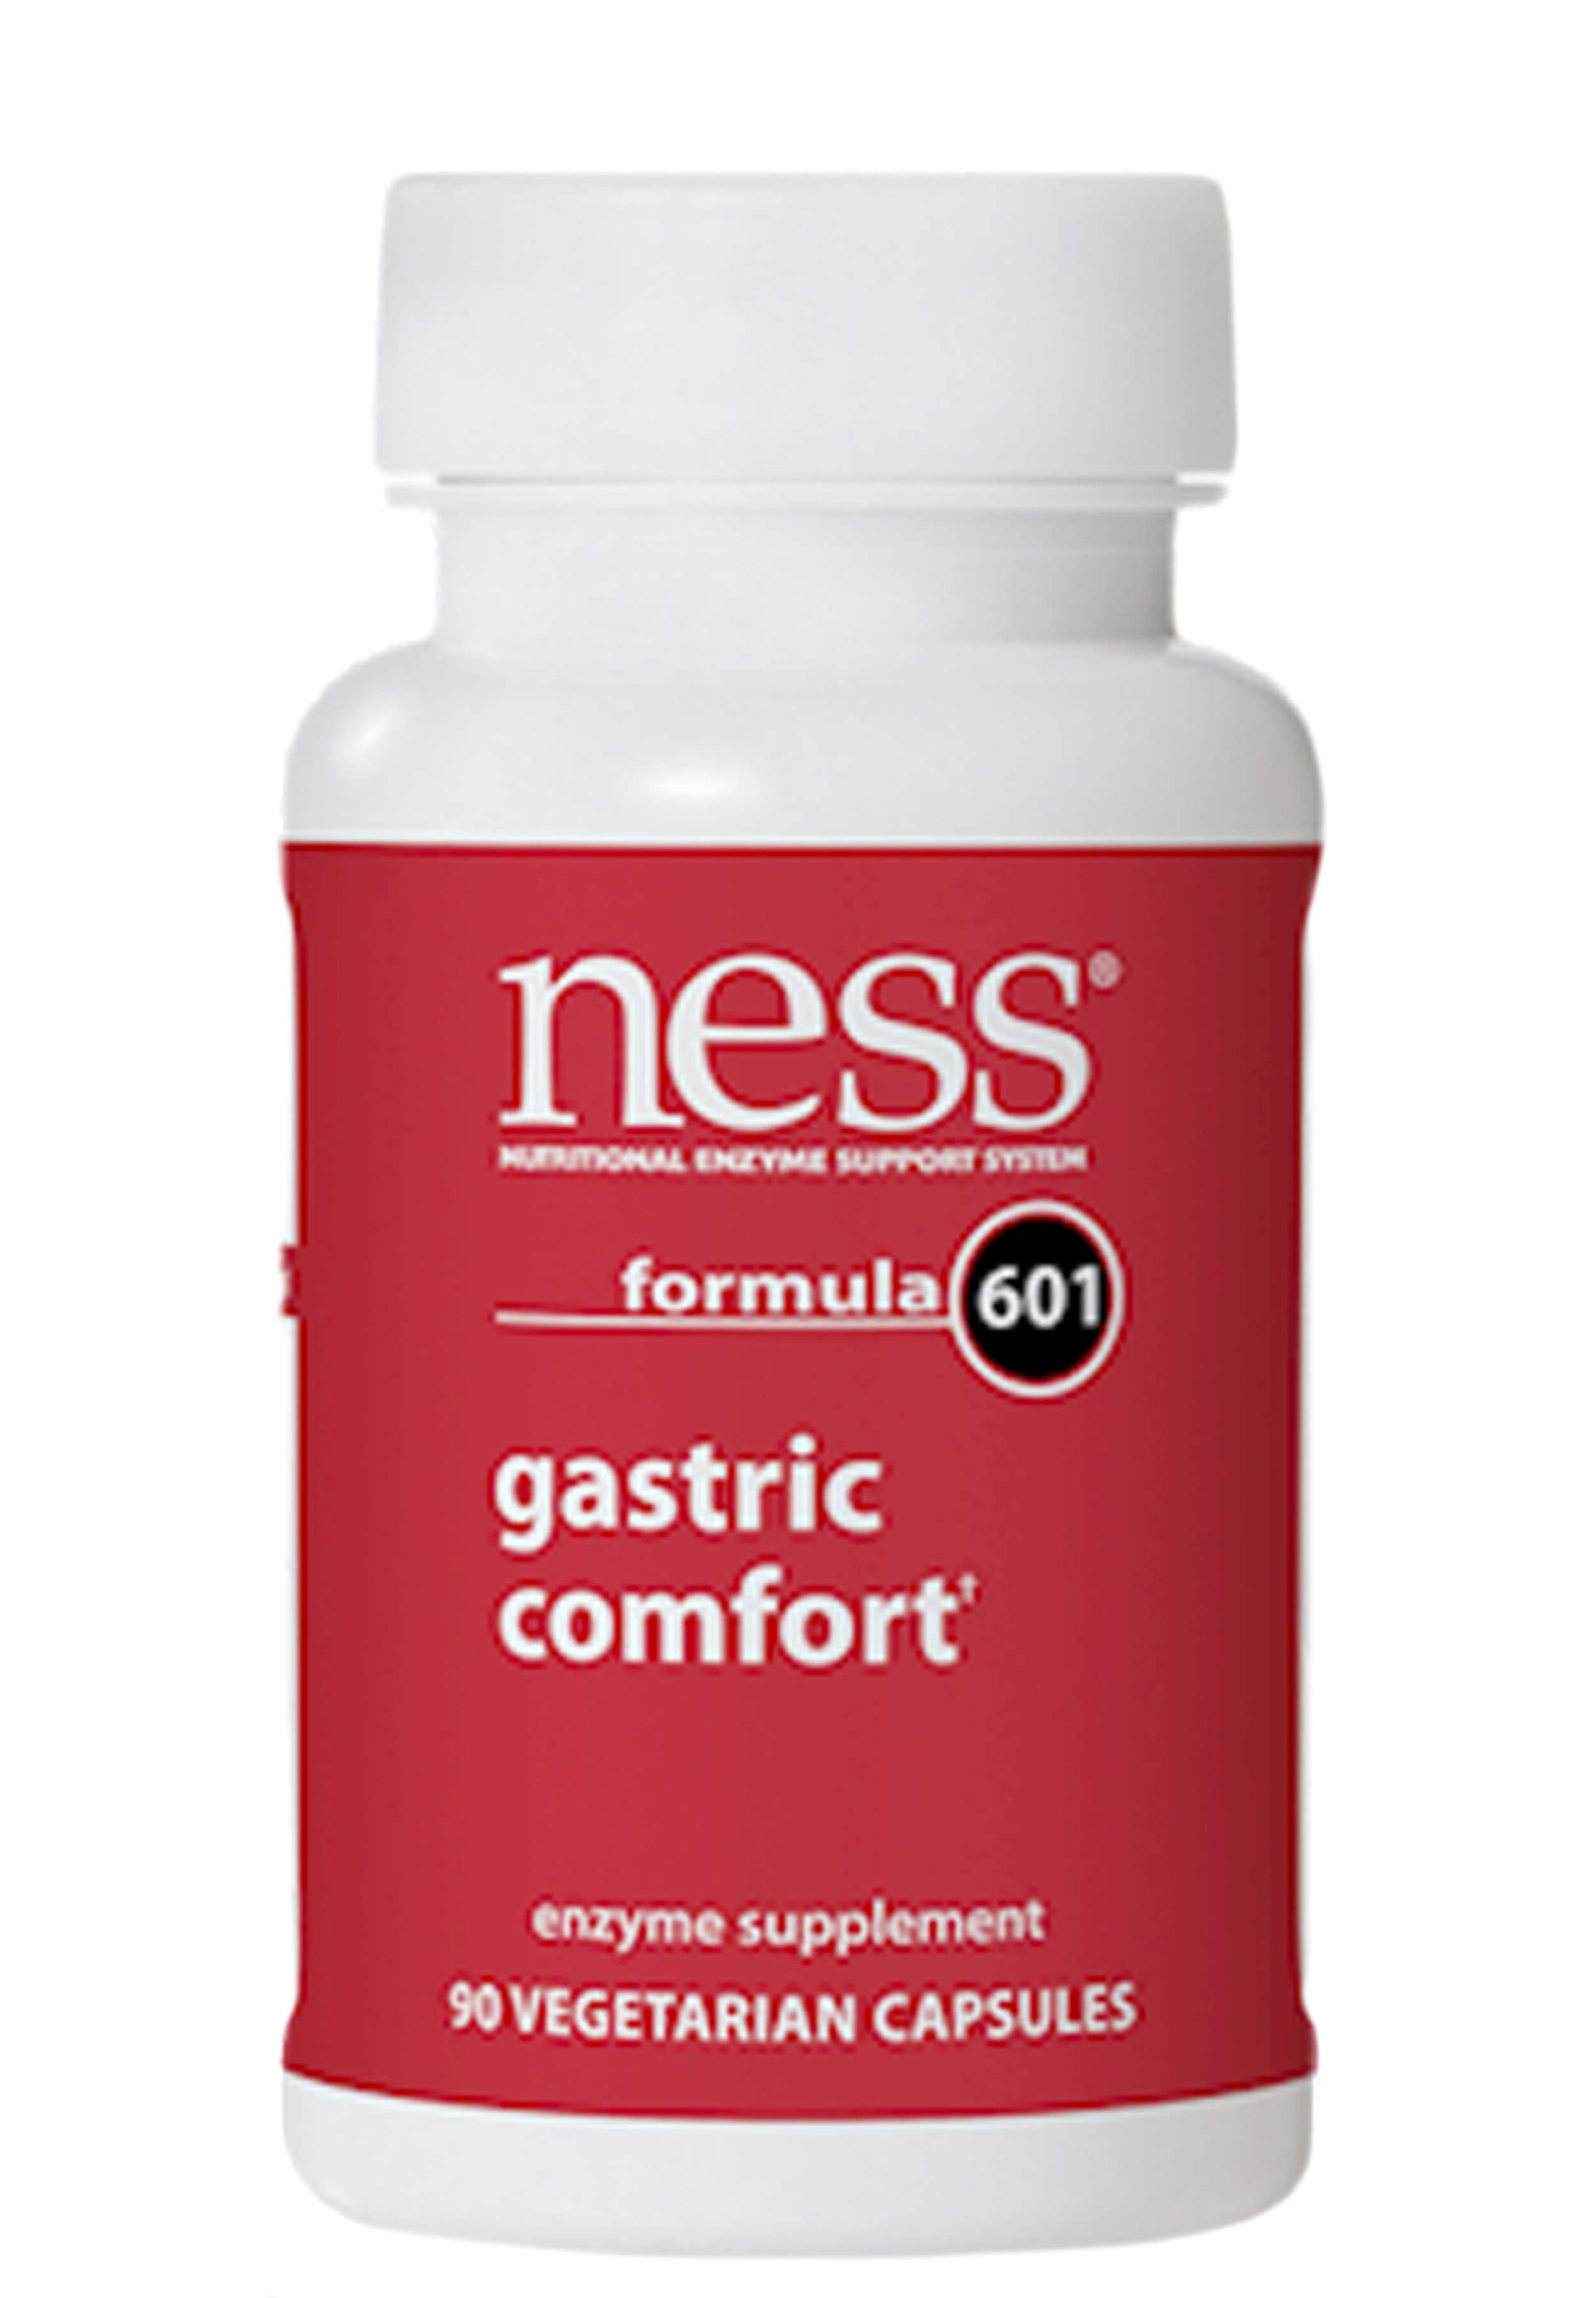 Ness Enzymes Gastric Comfort Formula 601